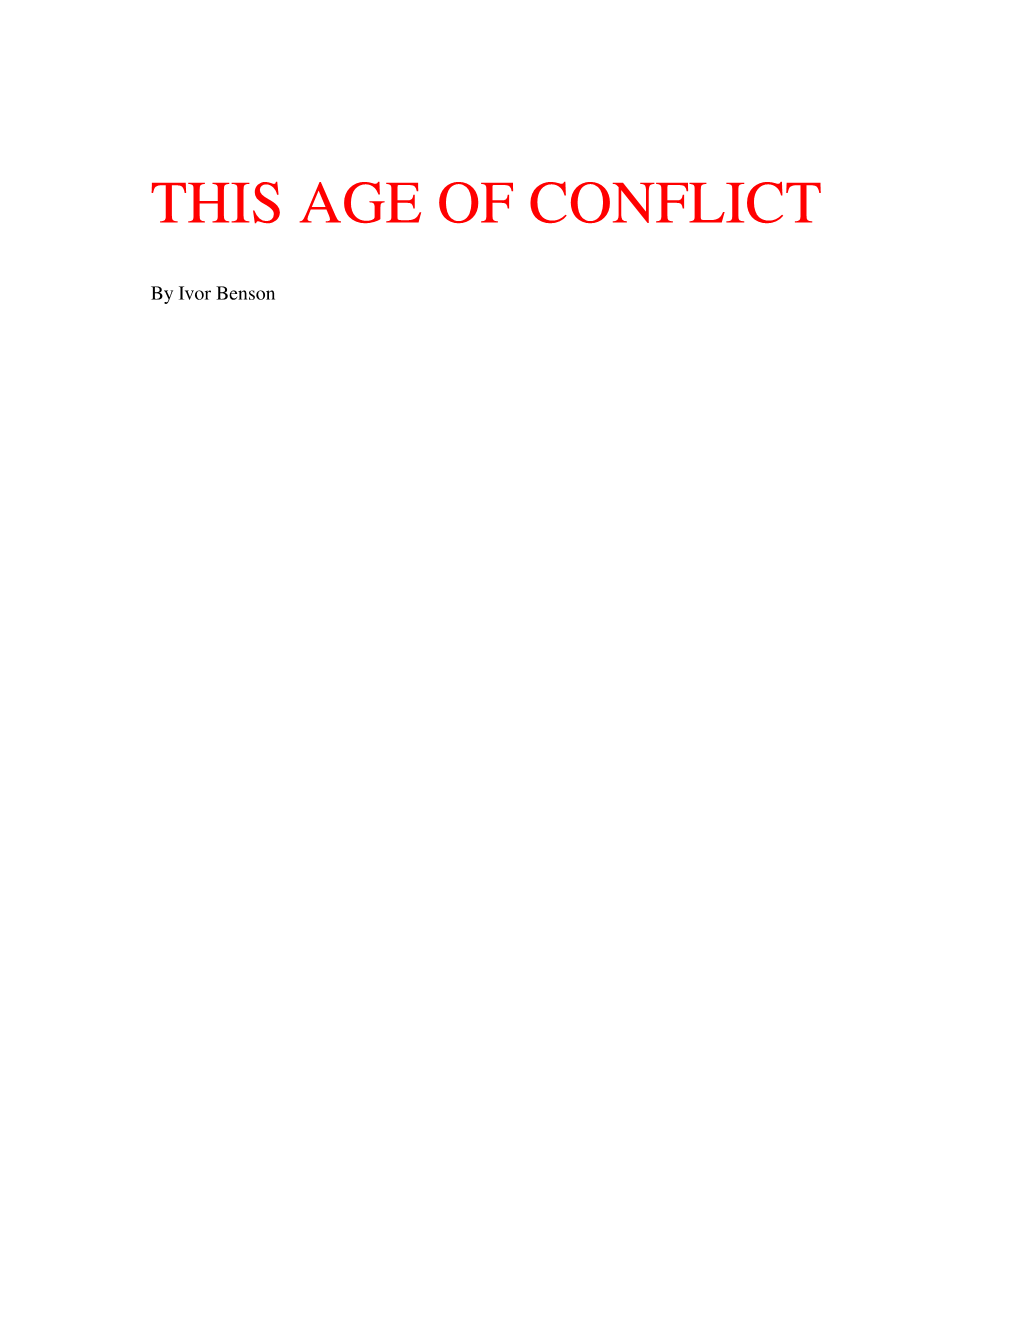 This Age of Conflict